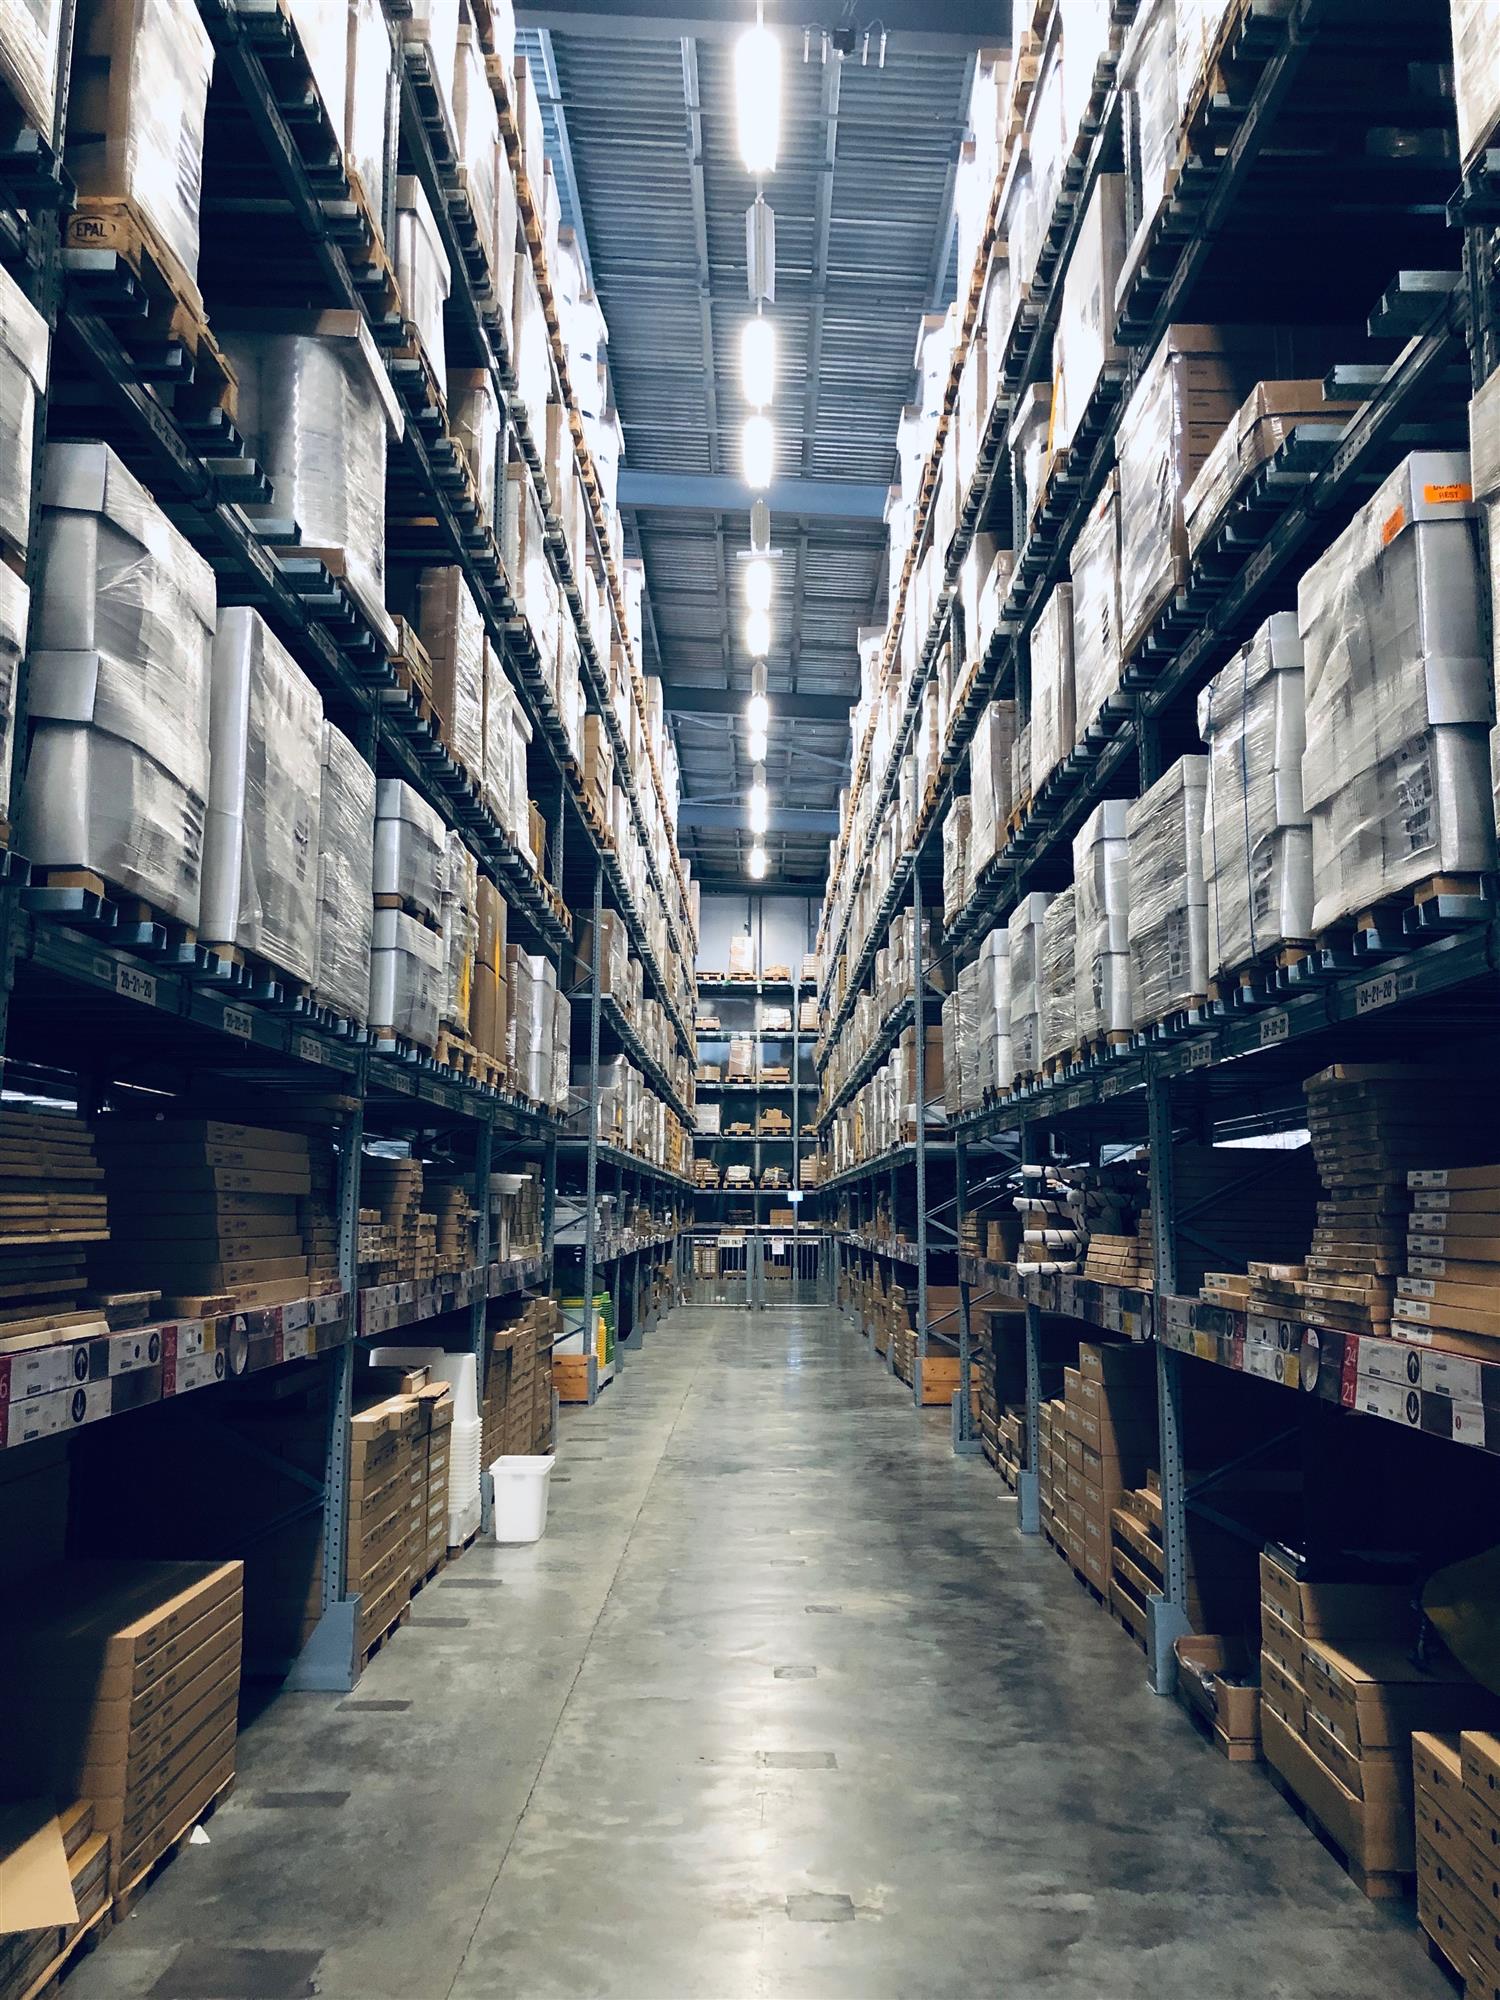 Ward & Kennedy provides temperature and humidity-controlled warehousing services